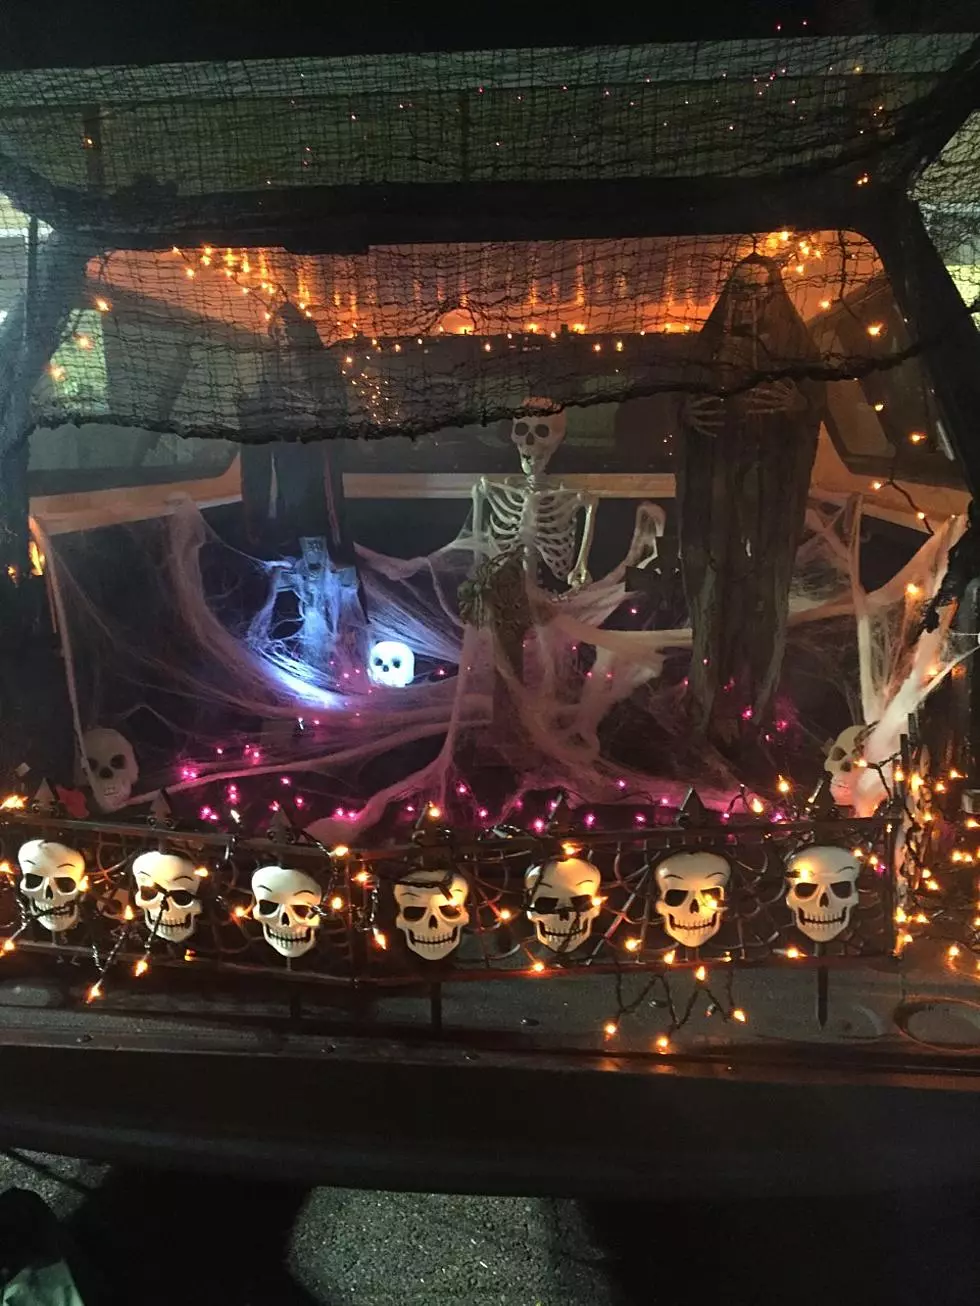 Date Set for Halloween Trunk or Treat in Lawrence Township, NJ